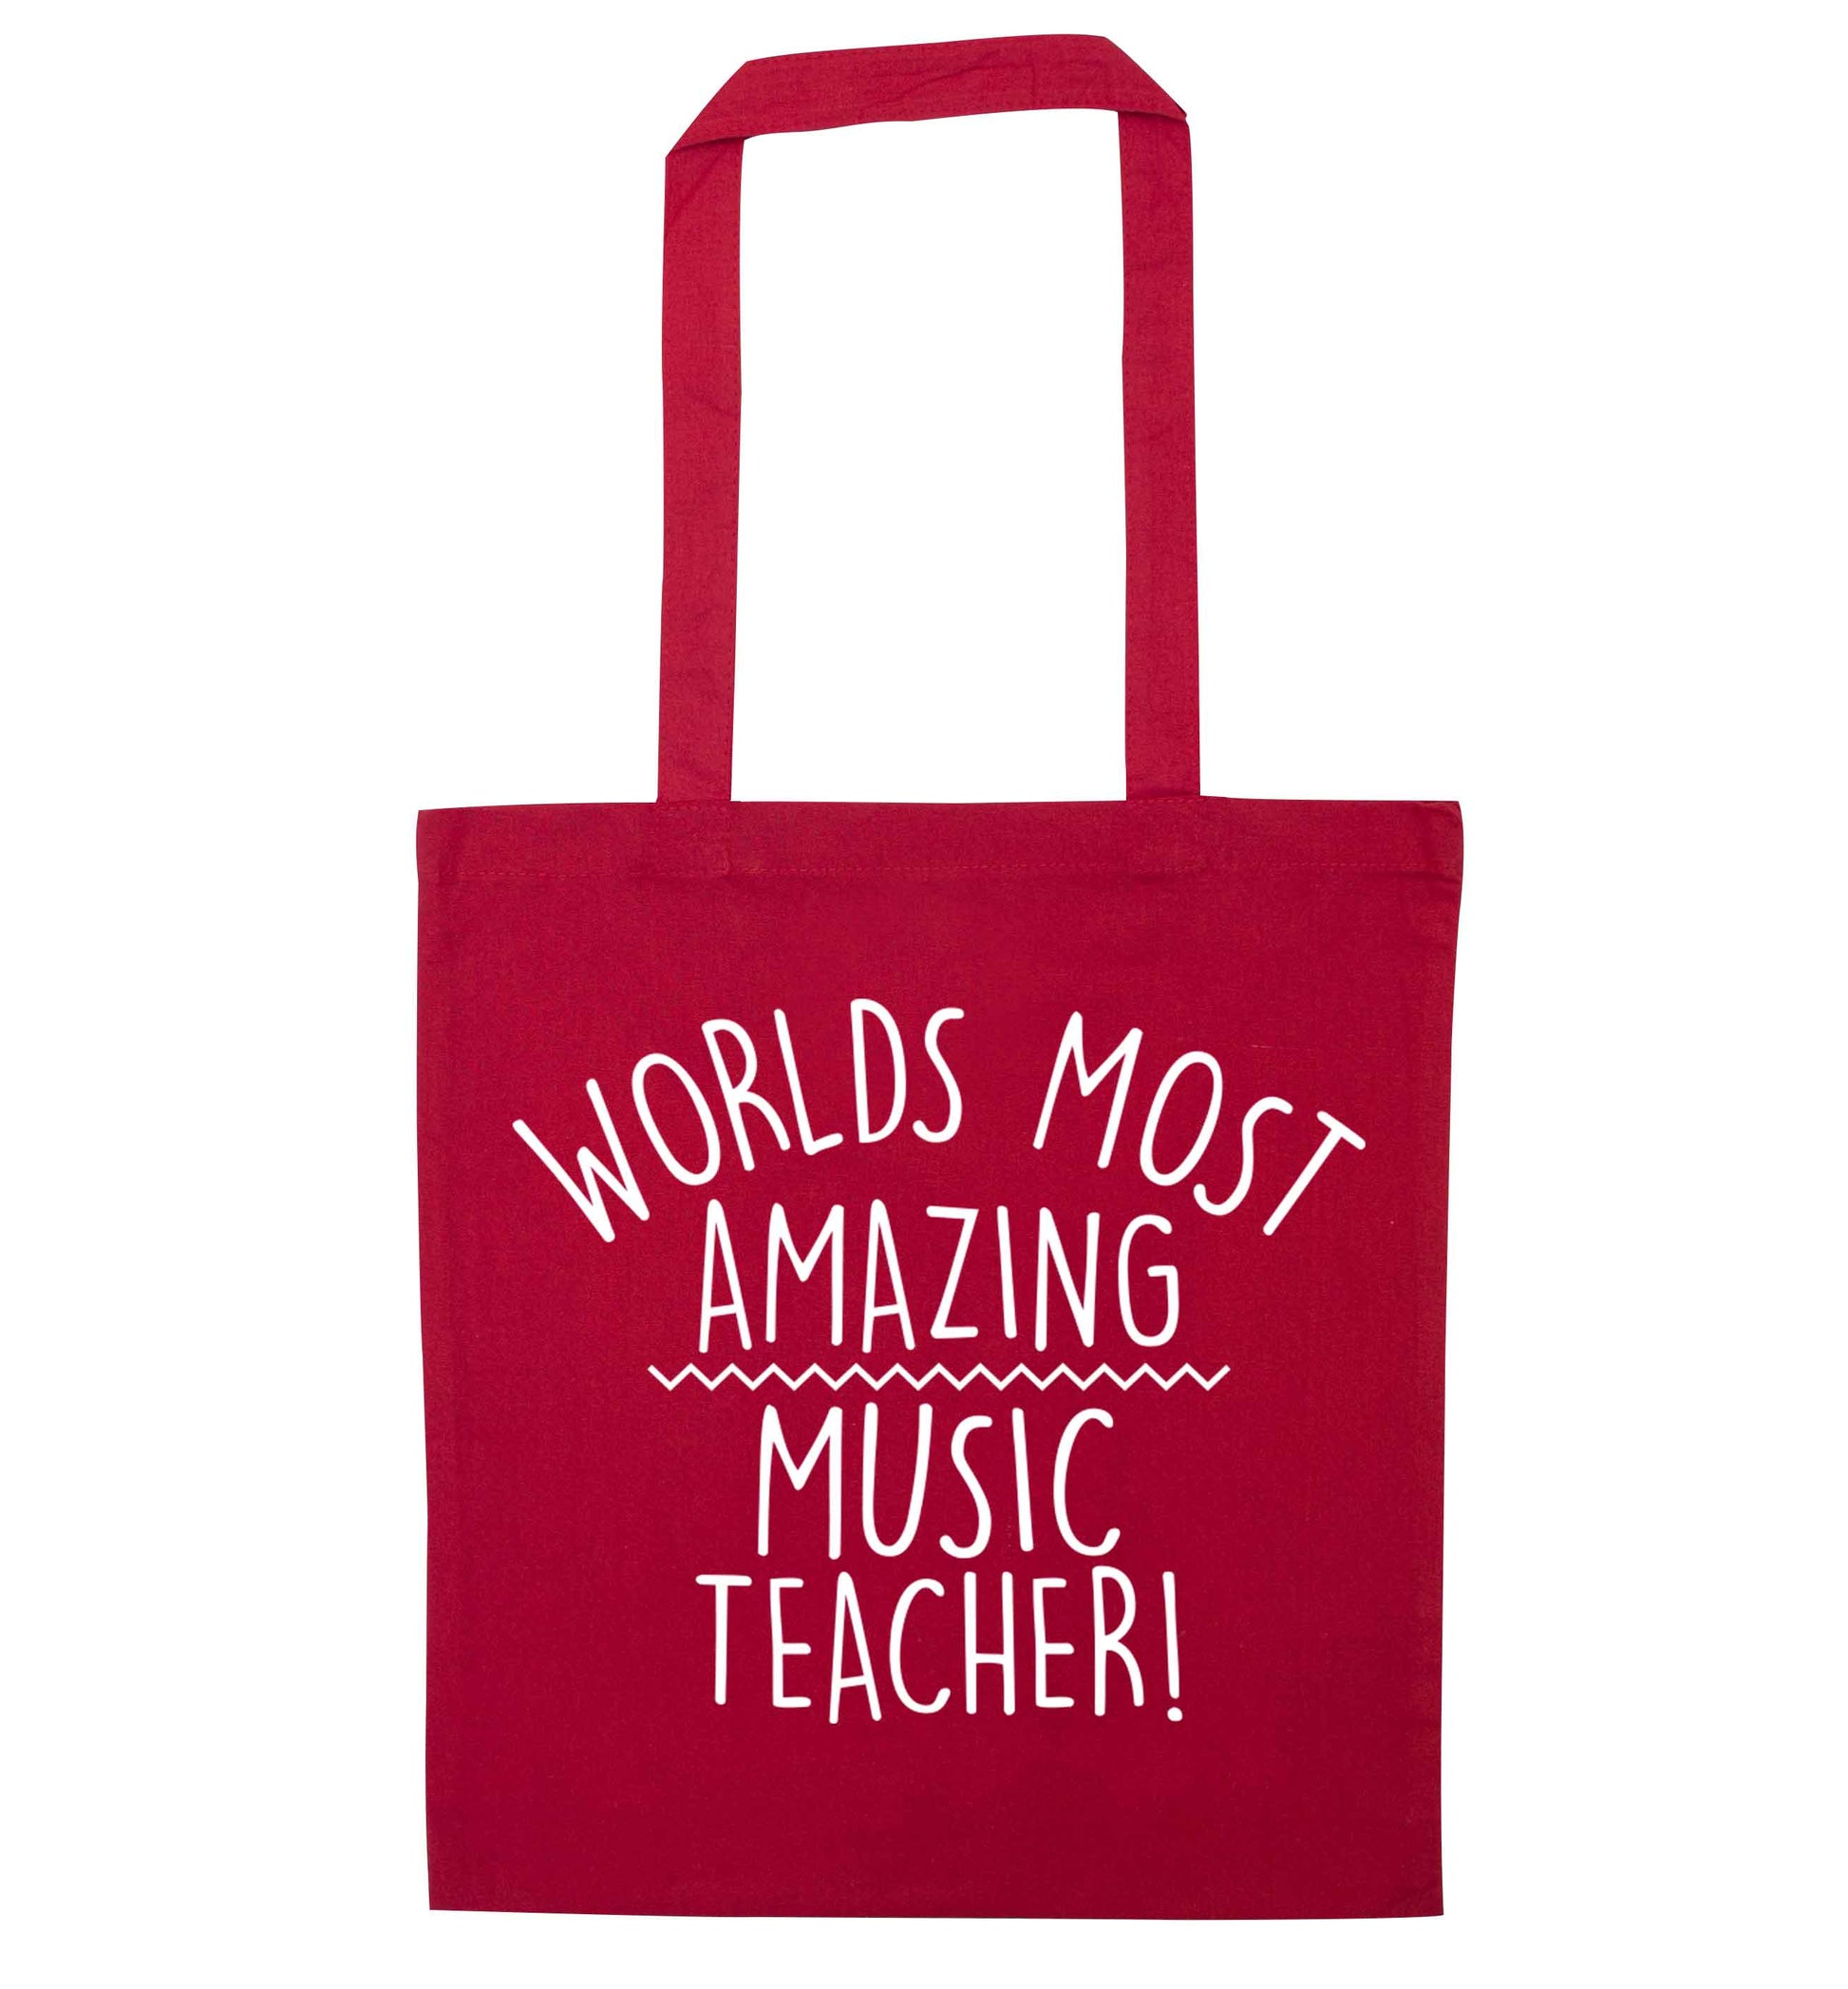 Worlds most amazing music teacher red tote bag